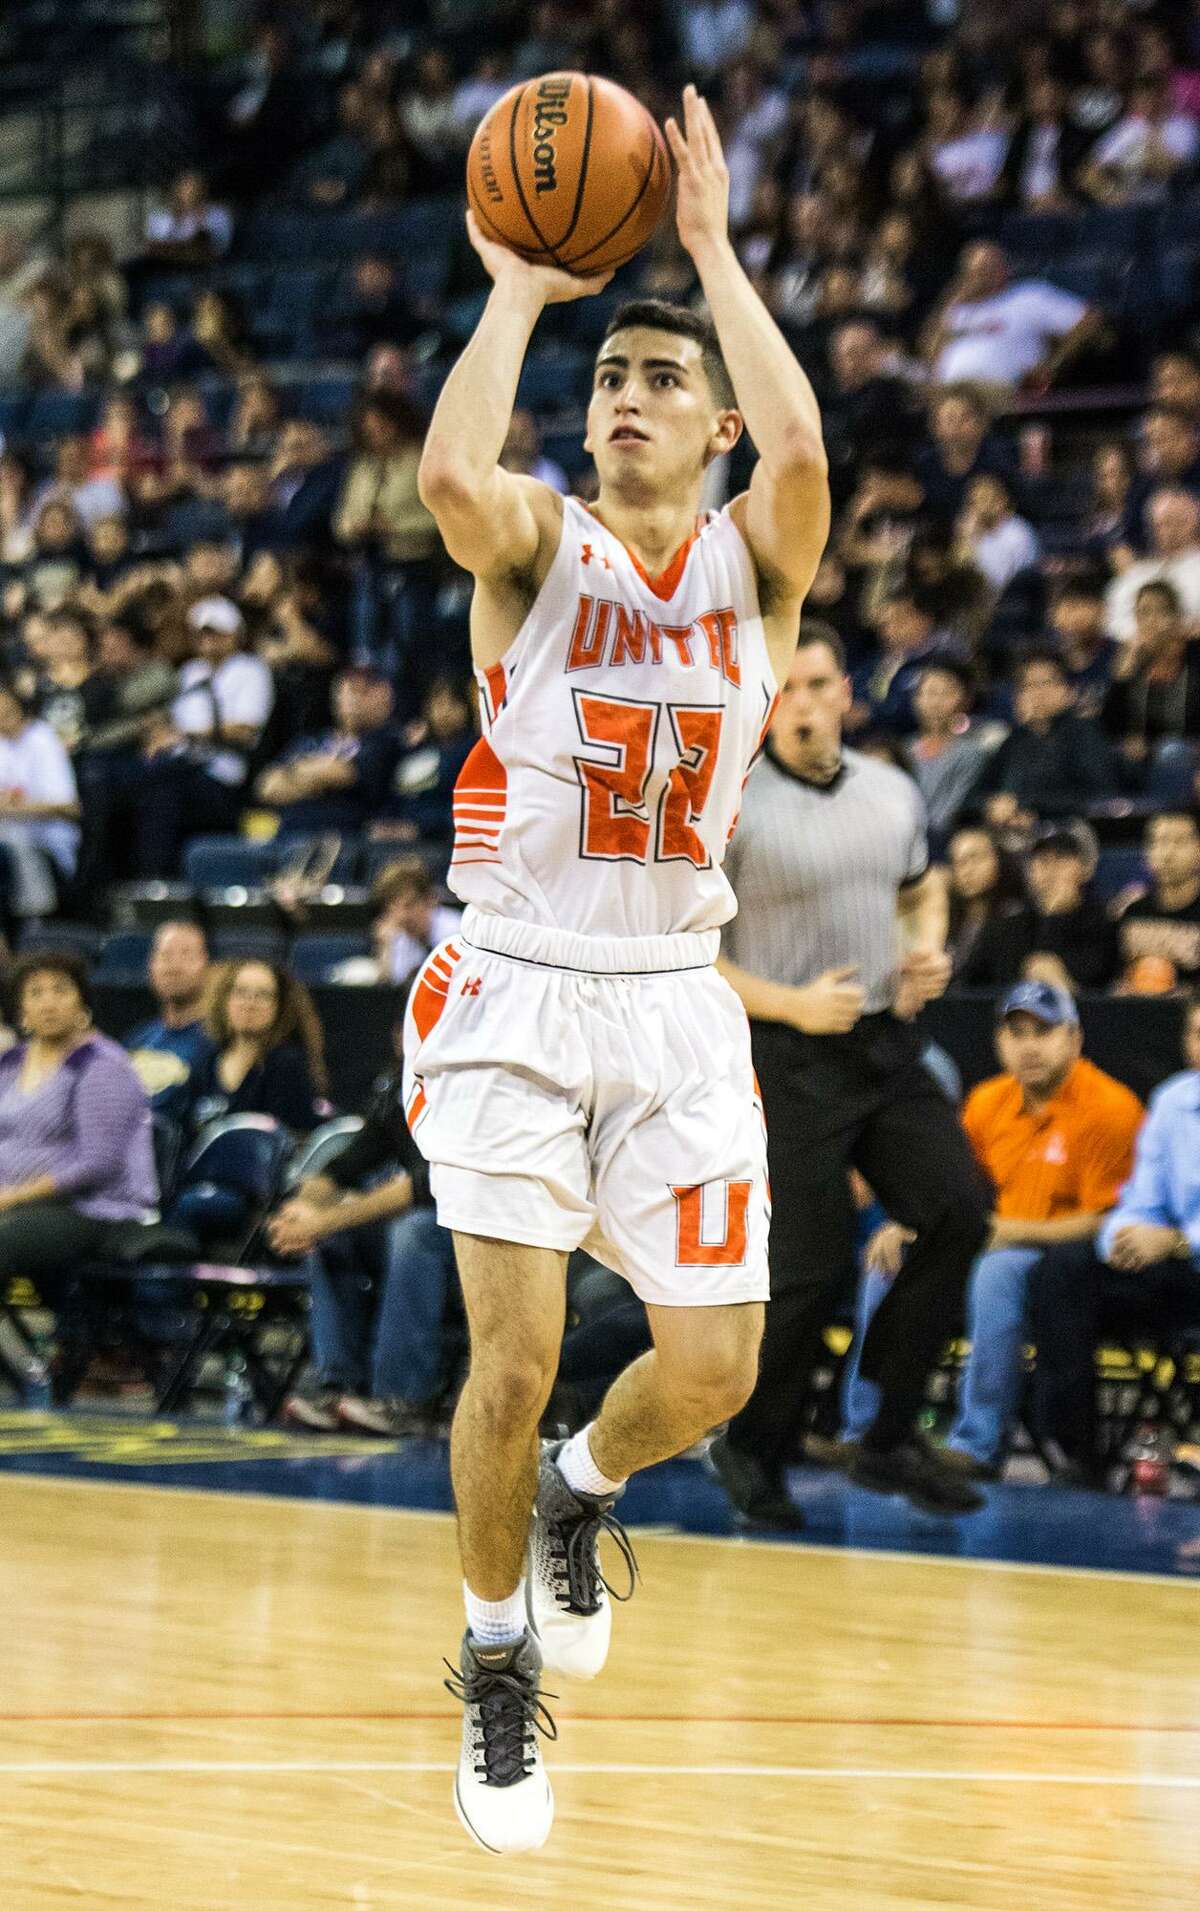 United’s Ivan Chapa recorded nine points, 4.5 assists, 4.4 rebounds and 3.4 steals per game his senior season.